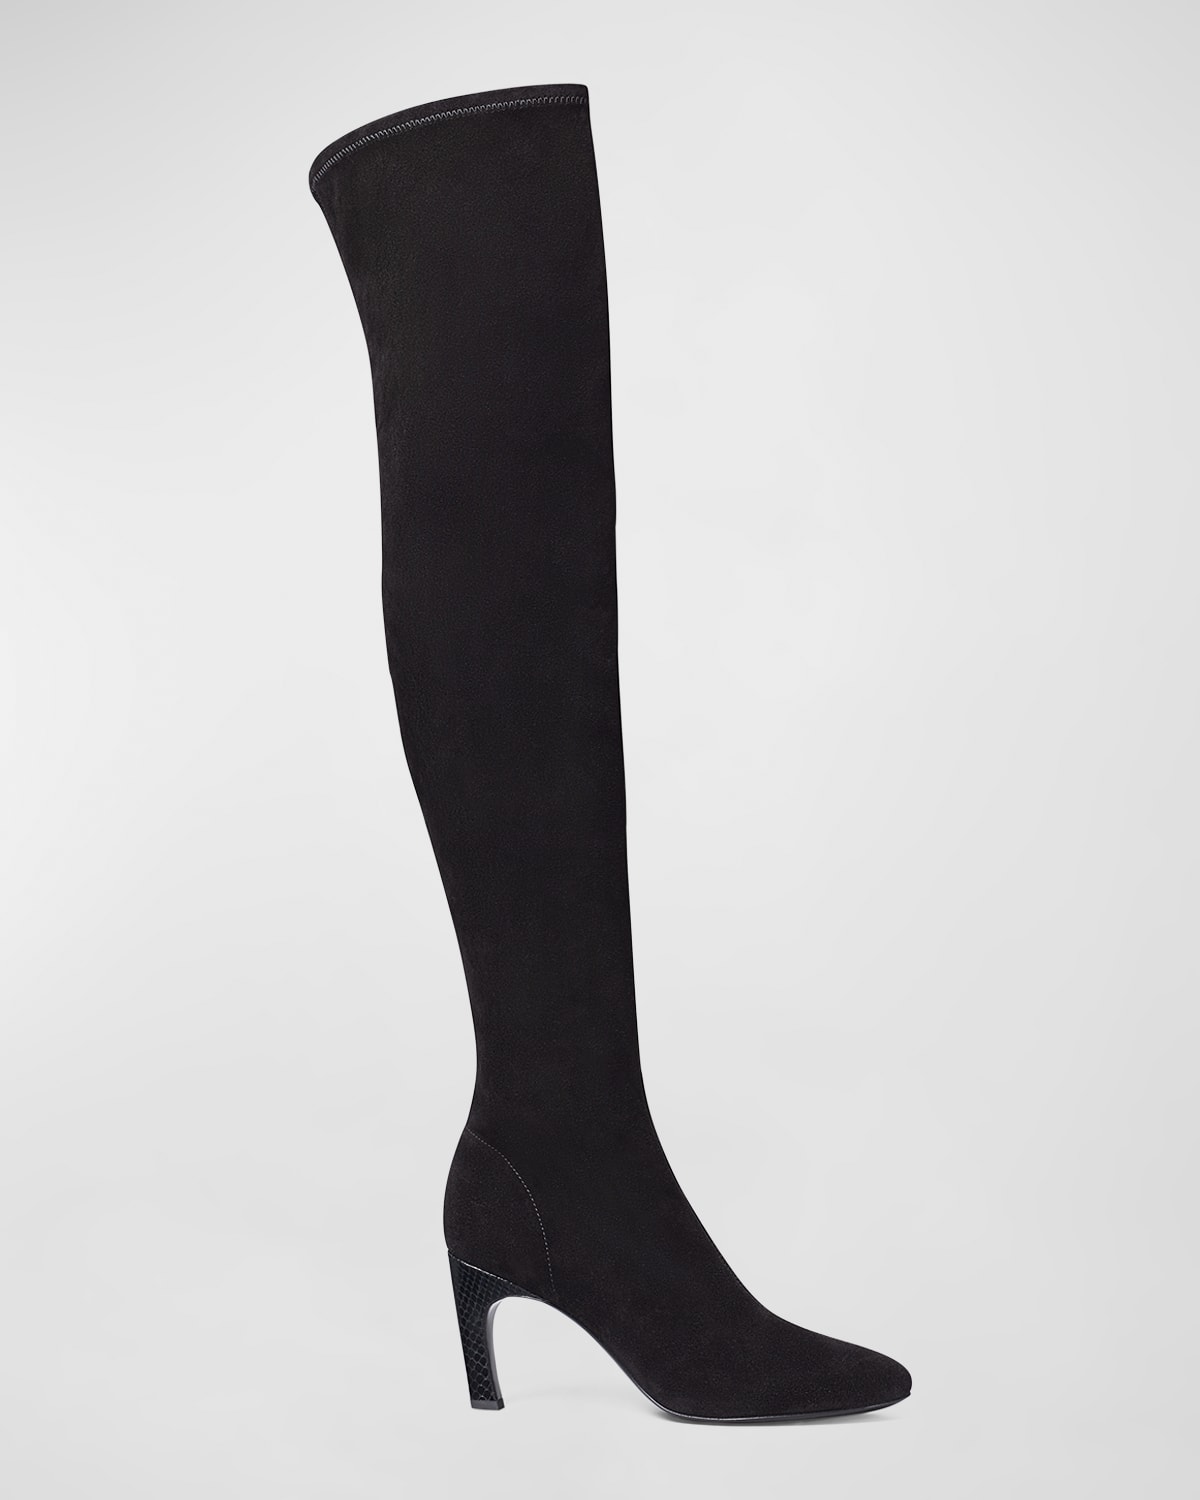 TORY BURCH STRETCH SUEDE OVER-THE-KNEE BOOTS